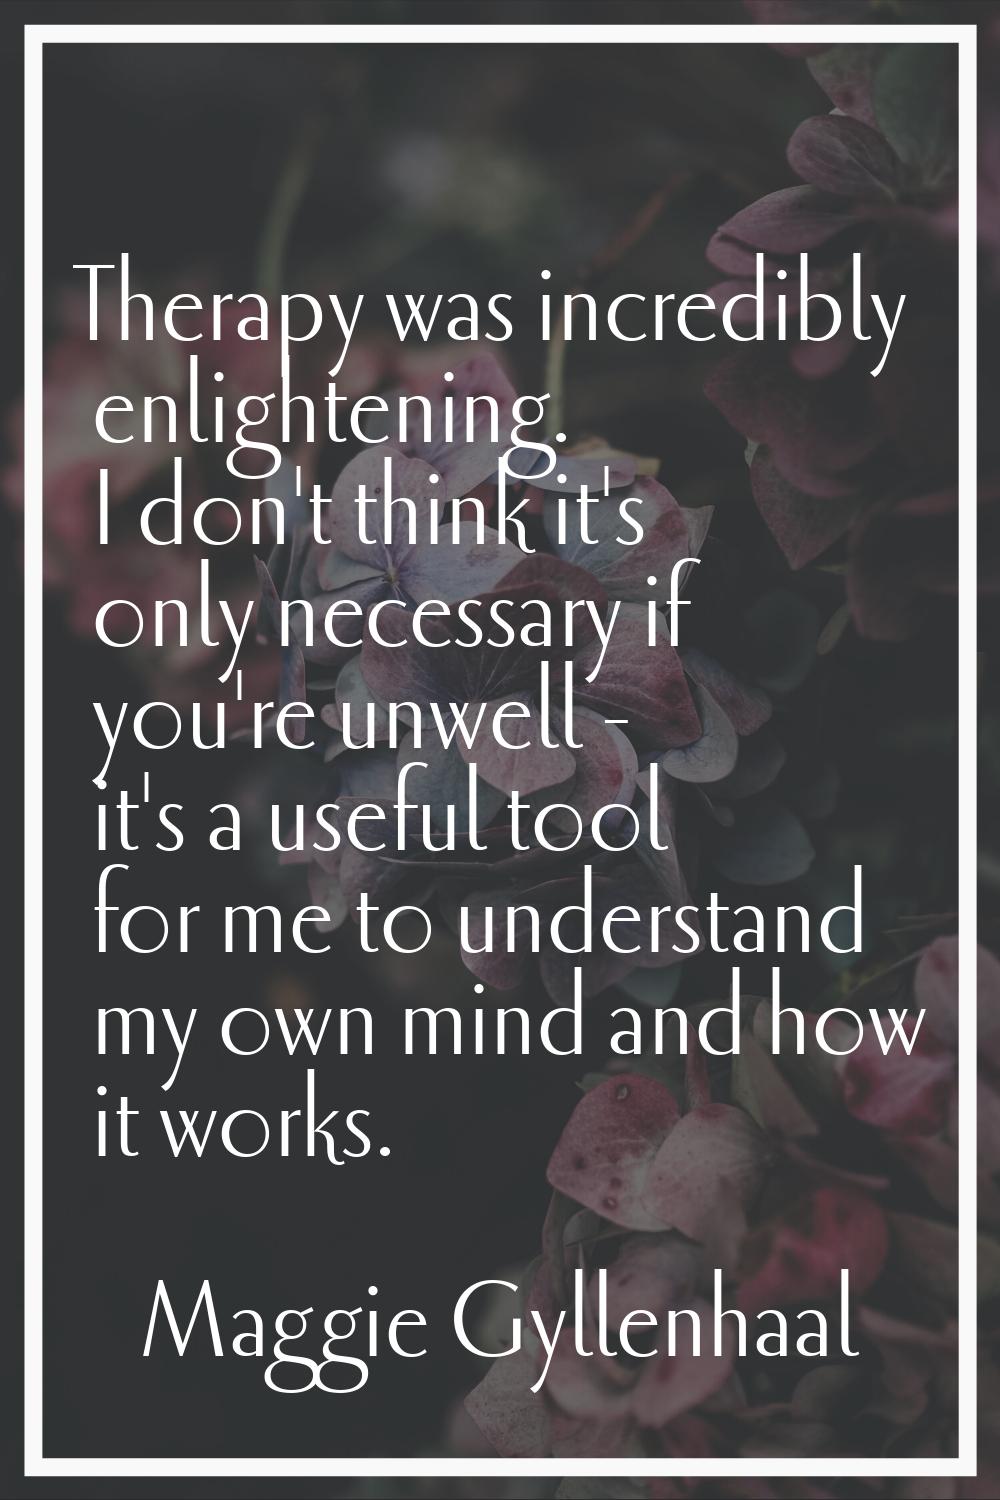 Therapy was incredibly enlightening. I don't think it's only necessary if you're unwell - it's a us